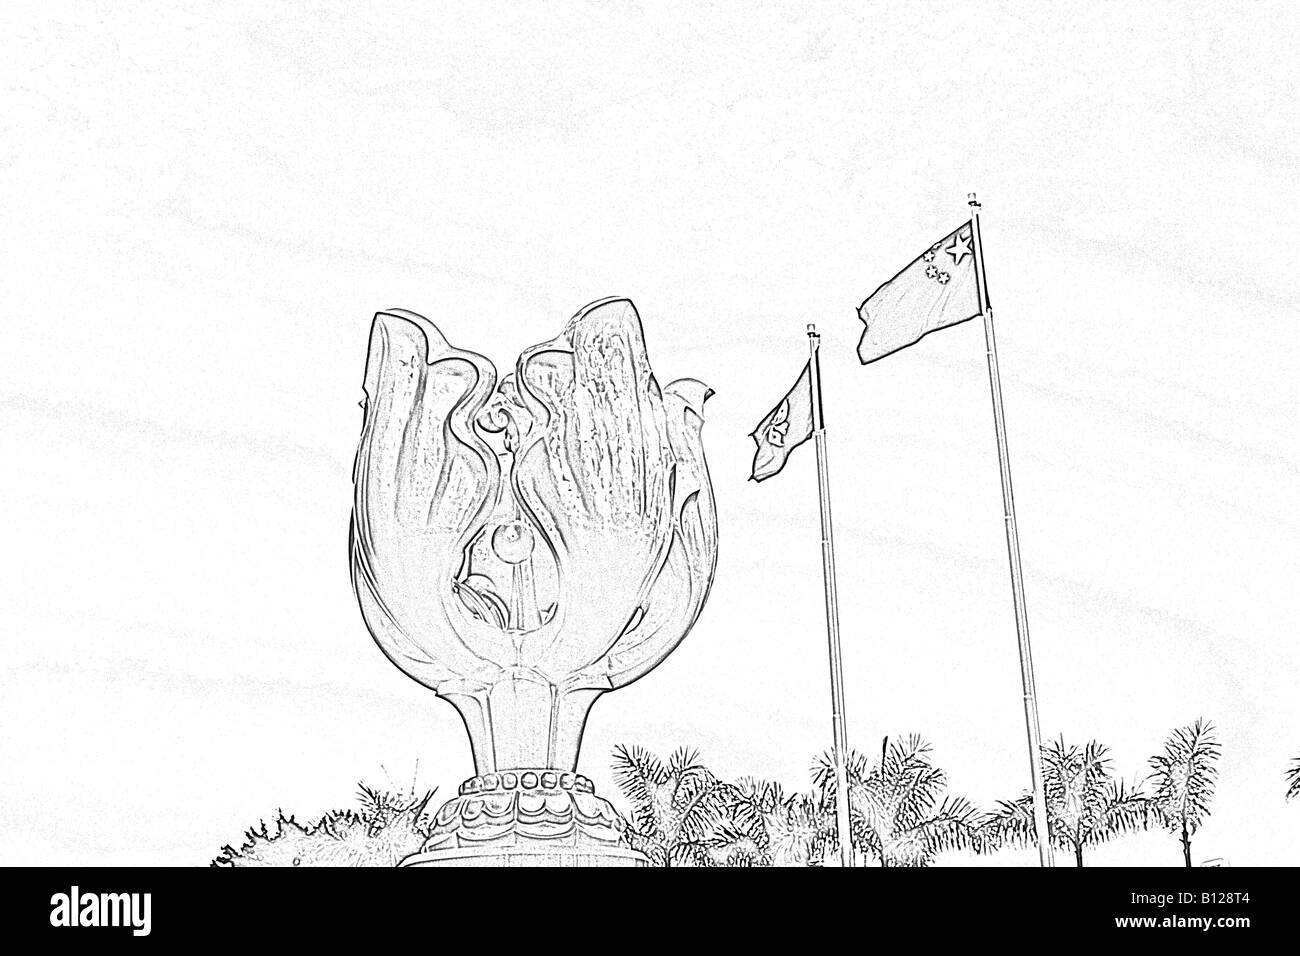 Digital Sketch of Forever Blooming Golden Bauhinia Sculpture with Chinese and Hong Kong Flag Stock Photo